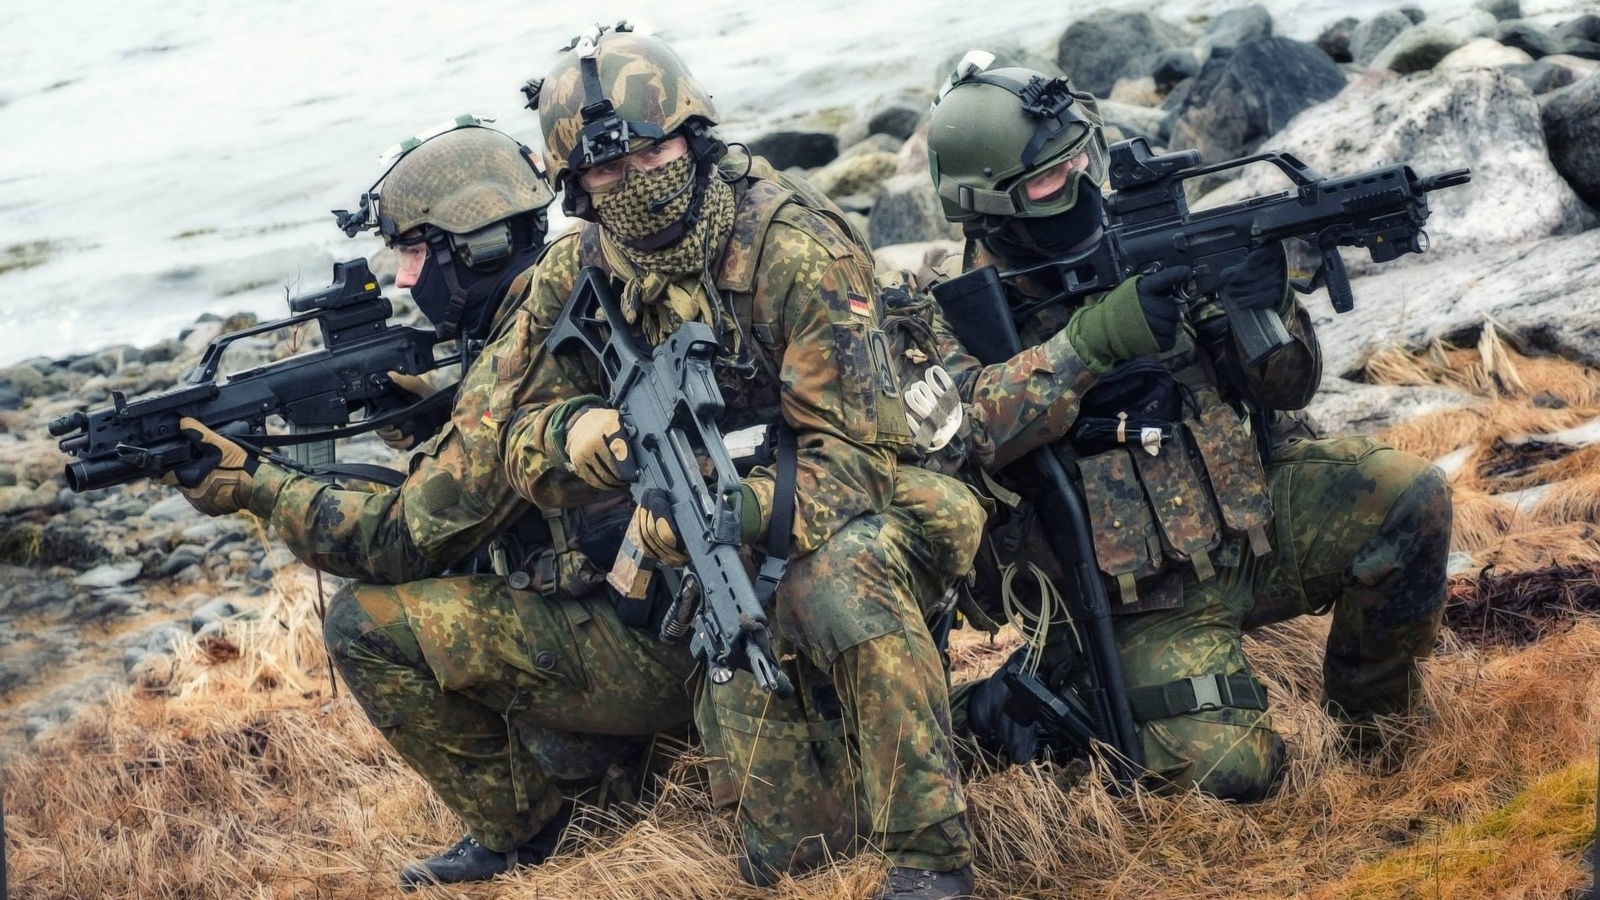 Wallpaper Soldiers Hk G36 Germany The